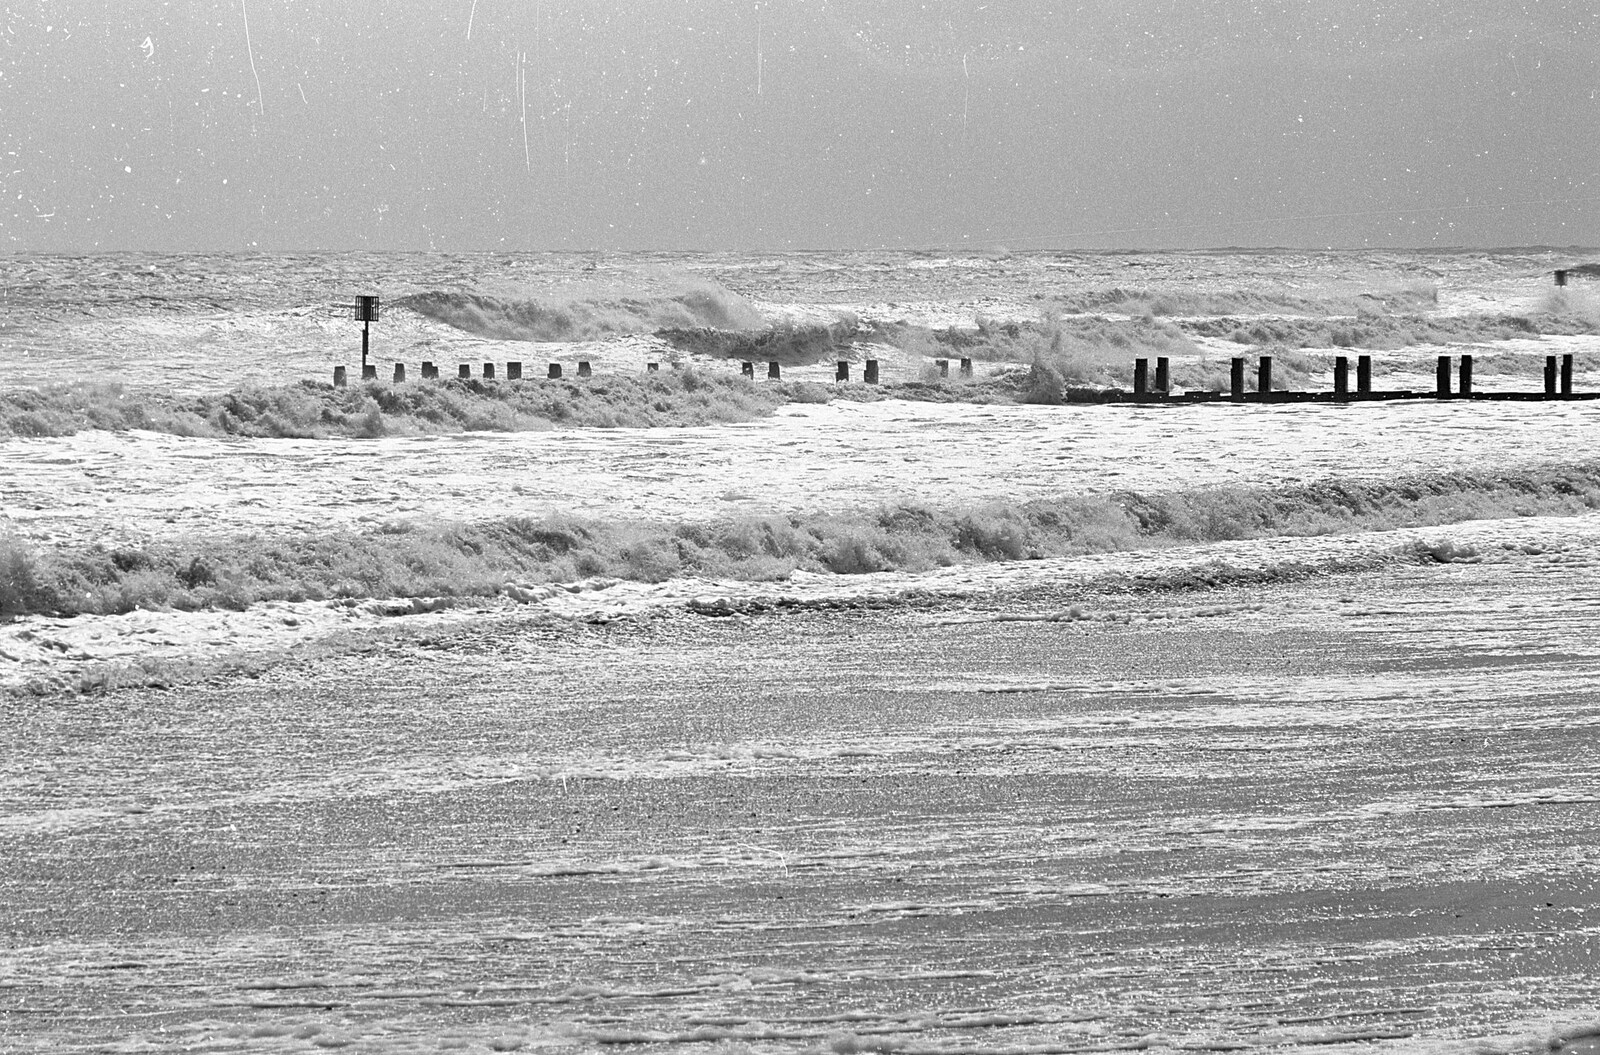 Blackshore Quay in Black and White, Southwold and Sizewell, Suffolk - 16th September 1992: Lashing waves